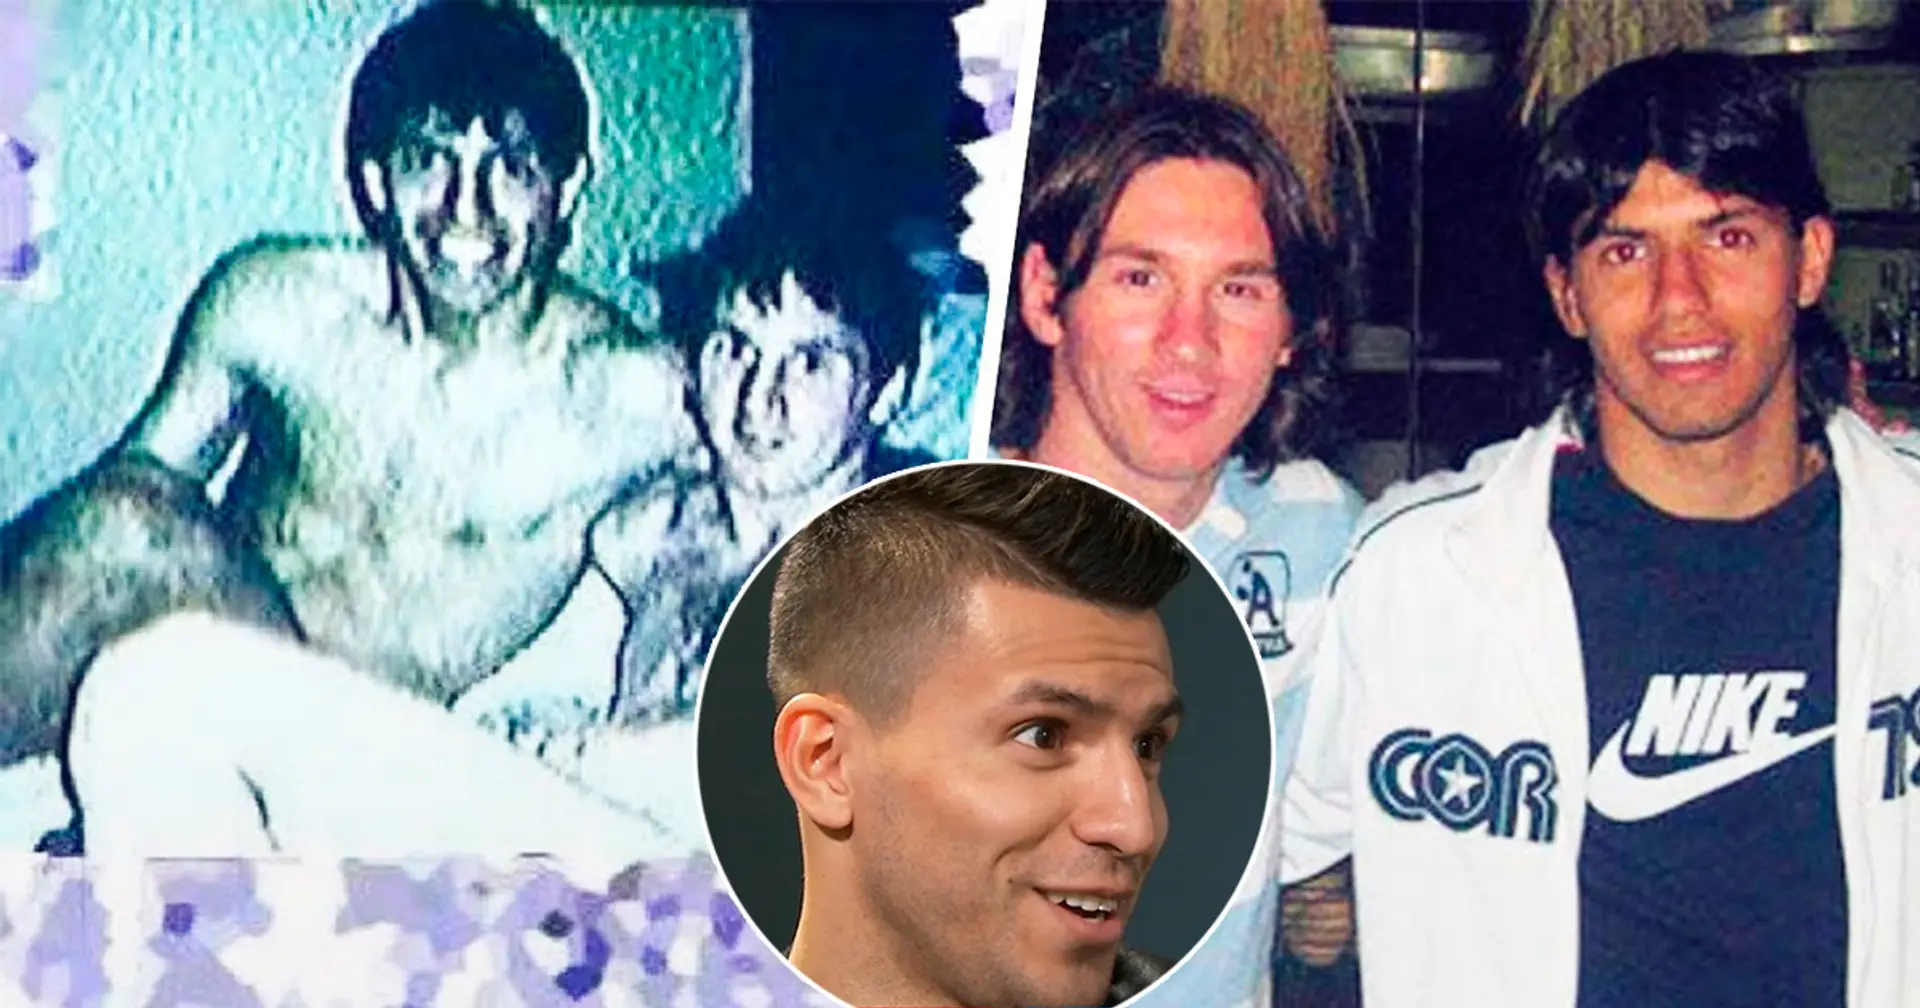 'What's your name again?' Aguero recalls the first meeting with Messi - he had no idea who Leo was